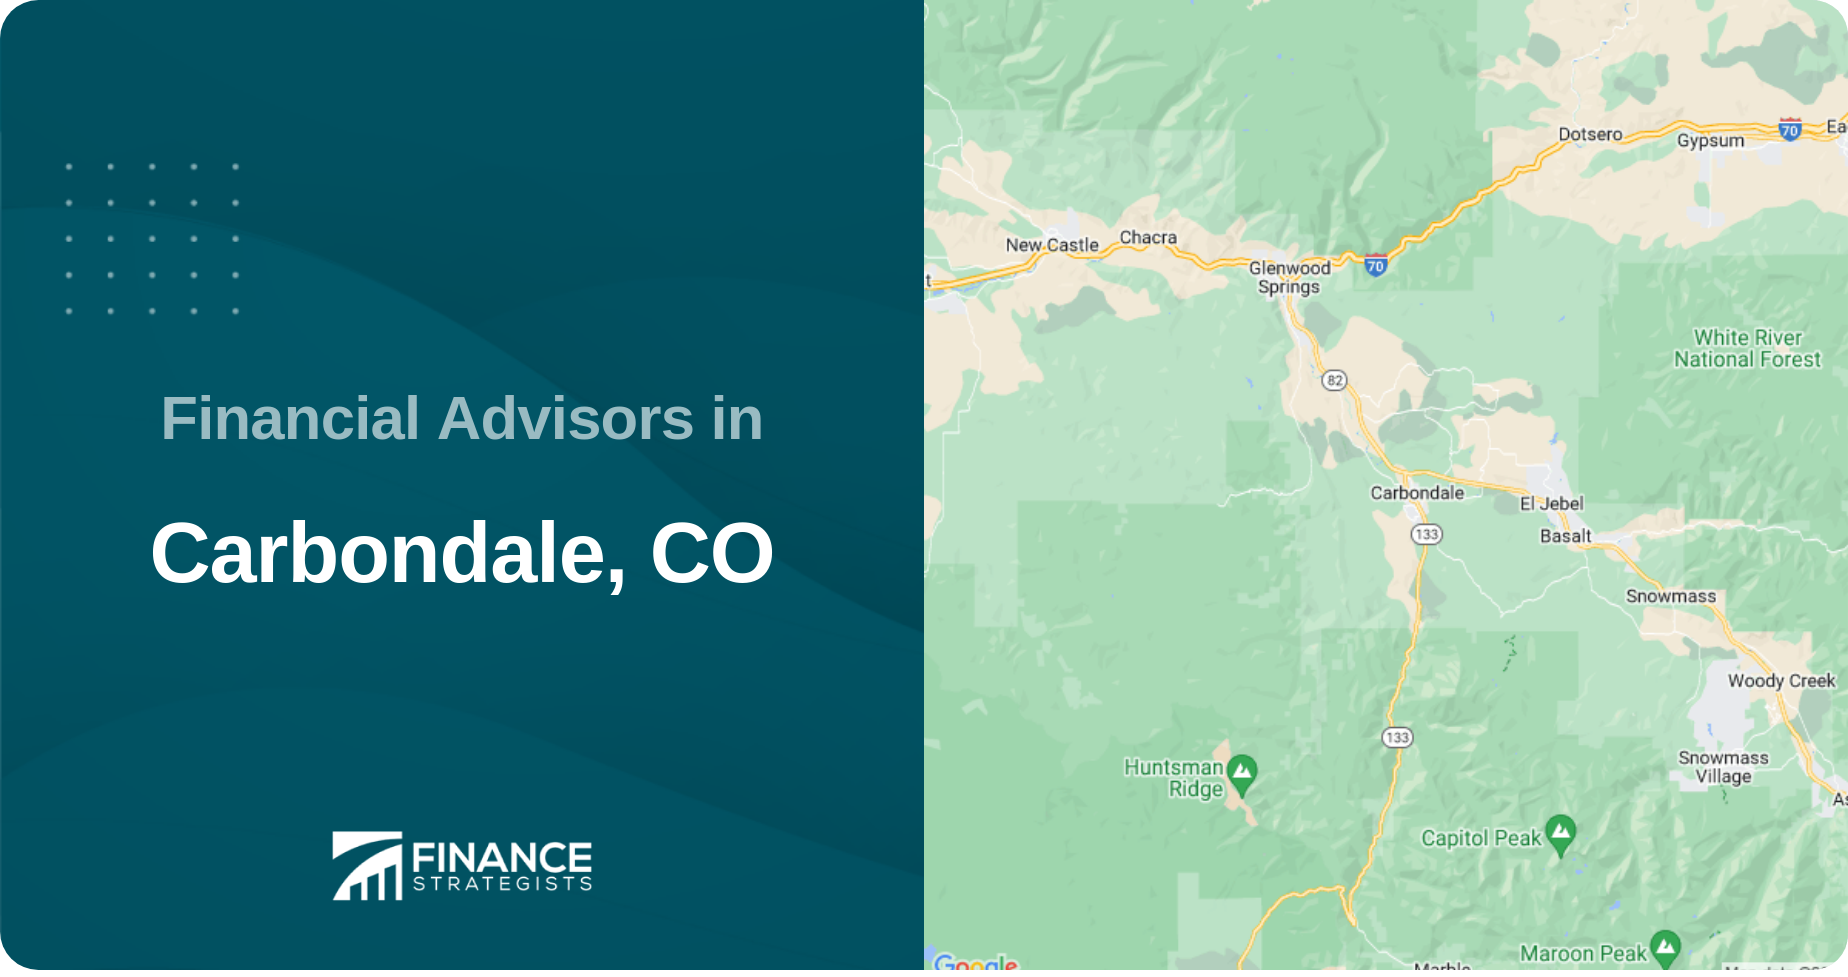 Financial Advisors in Carbondale, CO